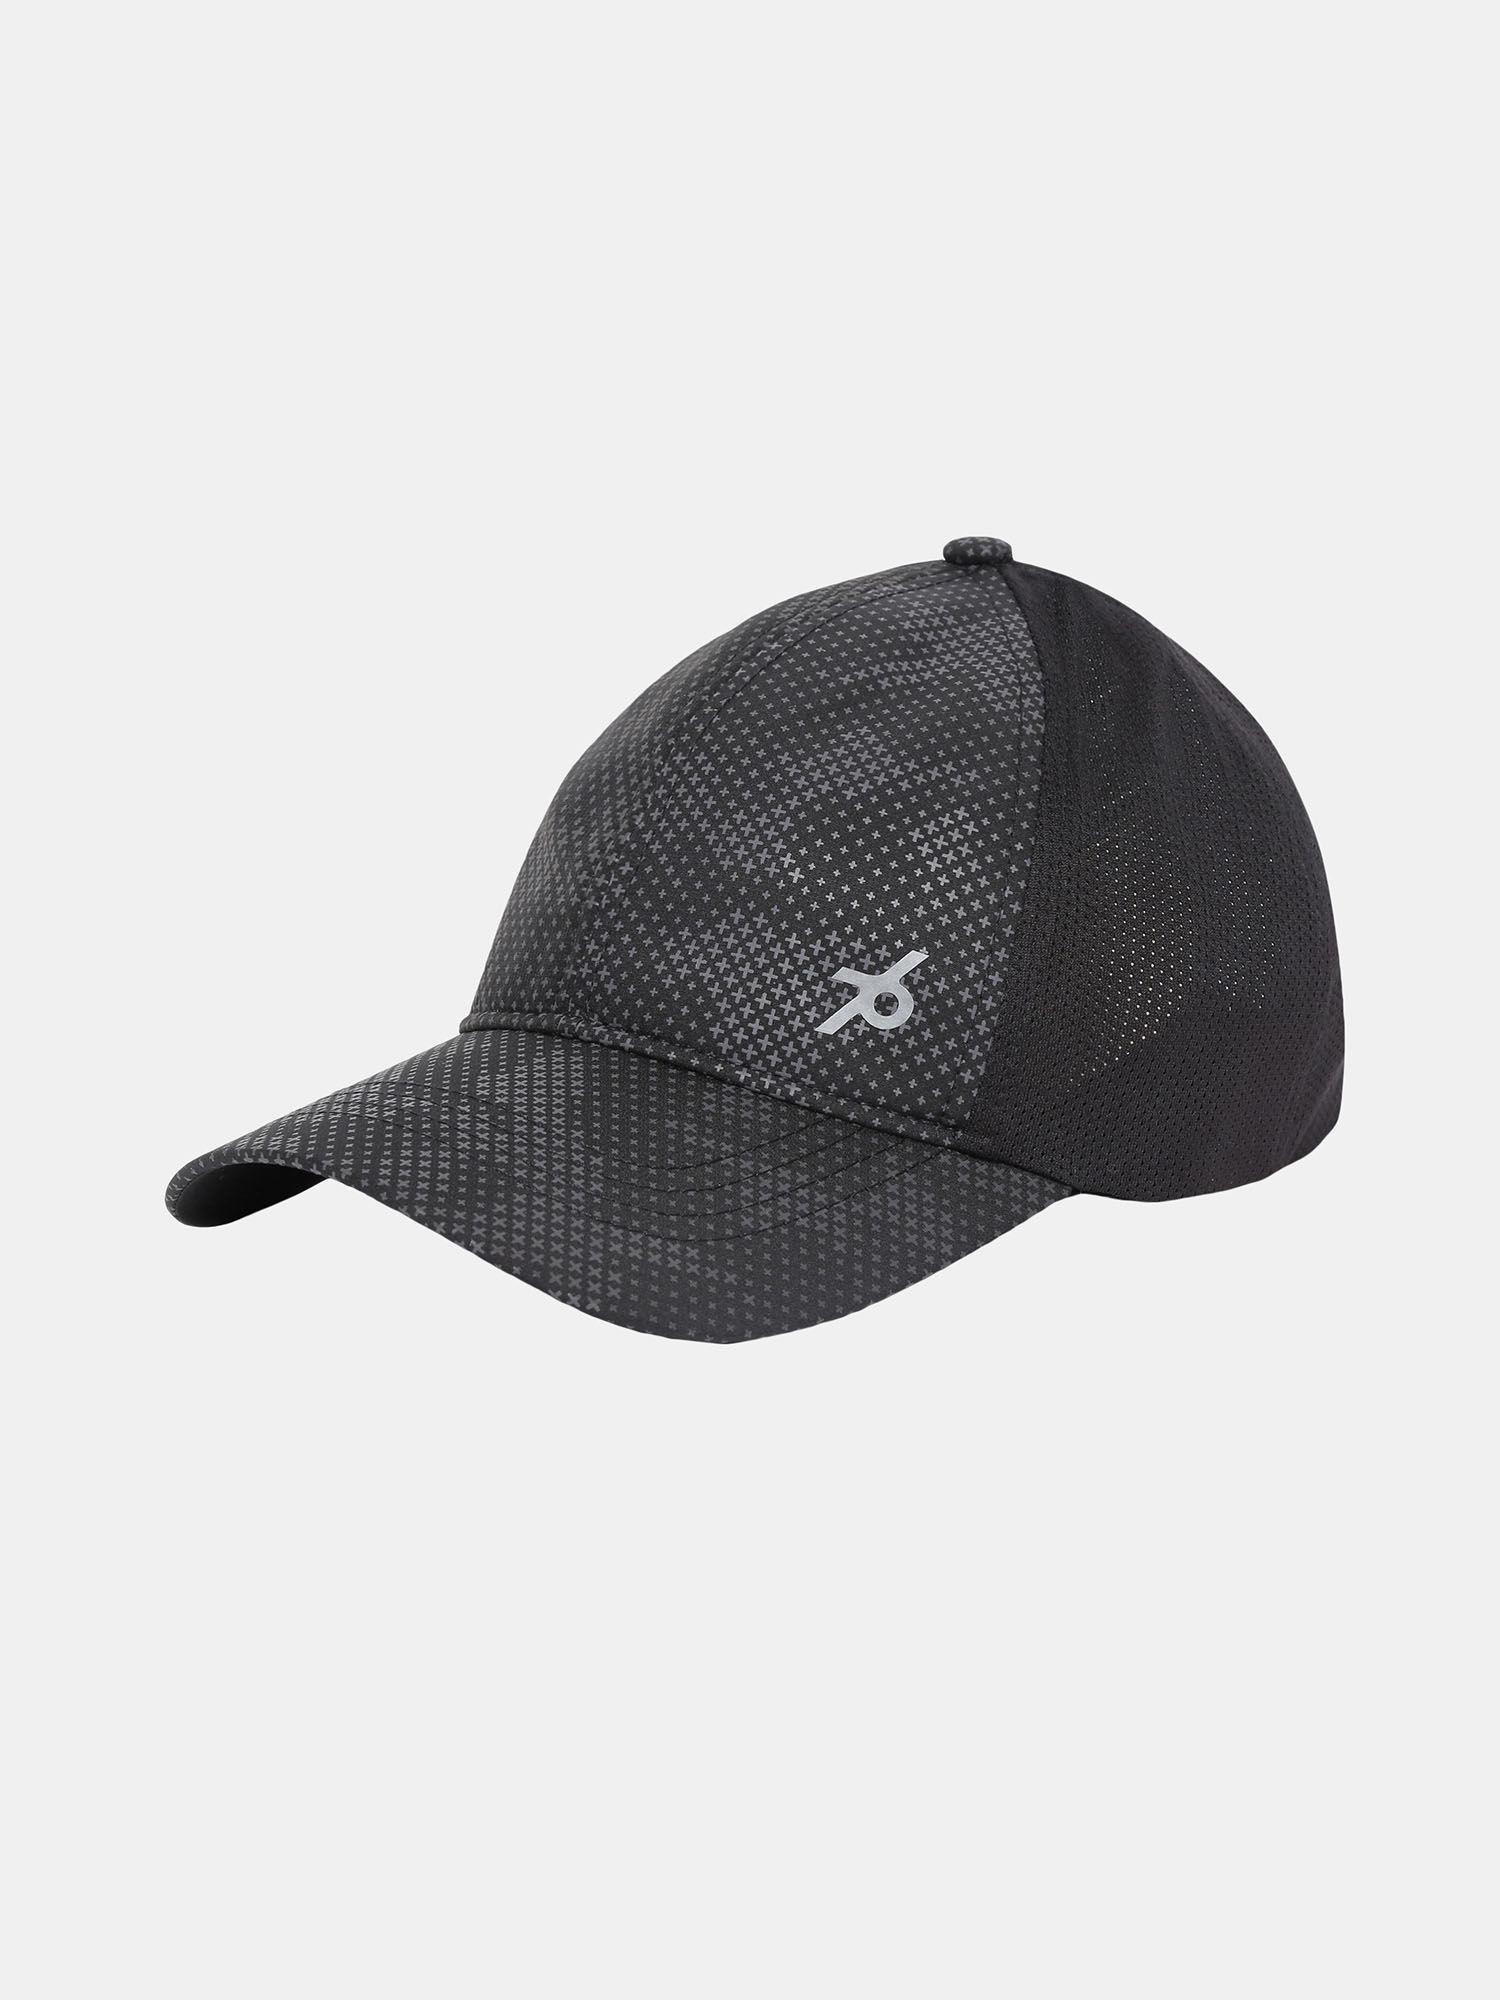 cp23 polyester printed cap with adjustable back closure and stay dry black